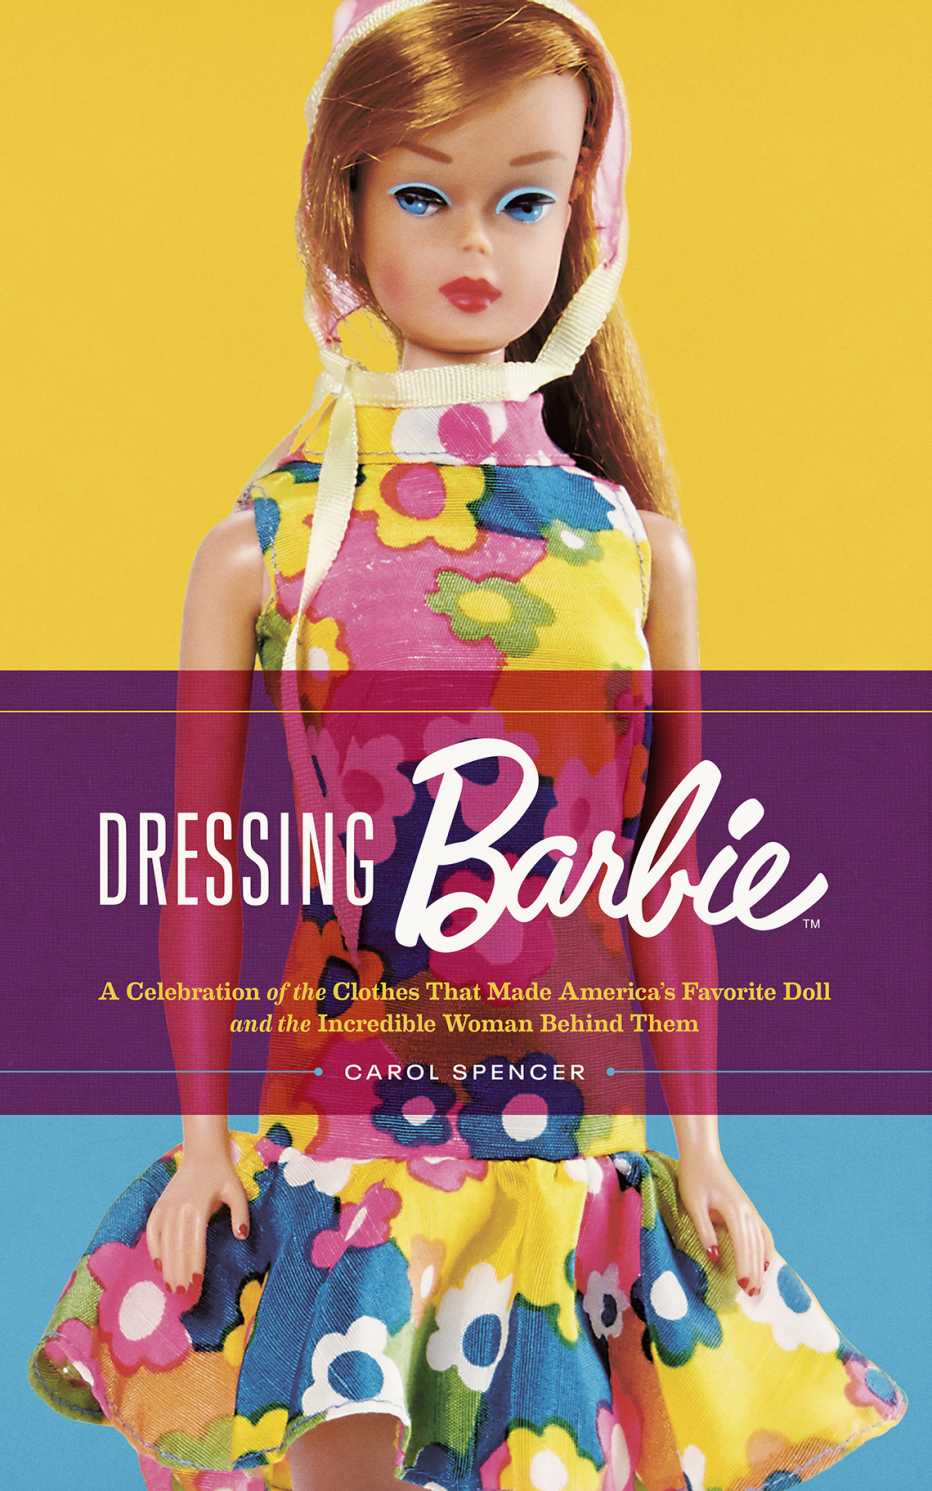 the book cover for dressing barbie